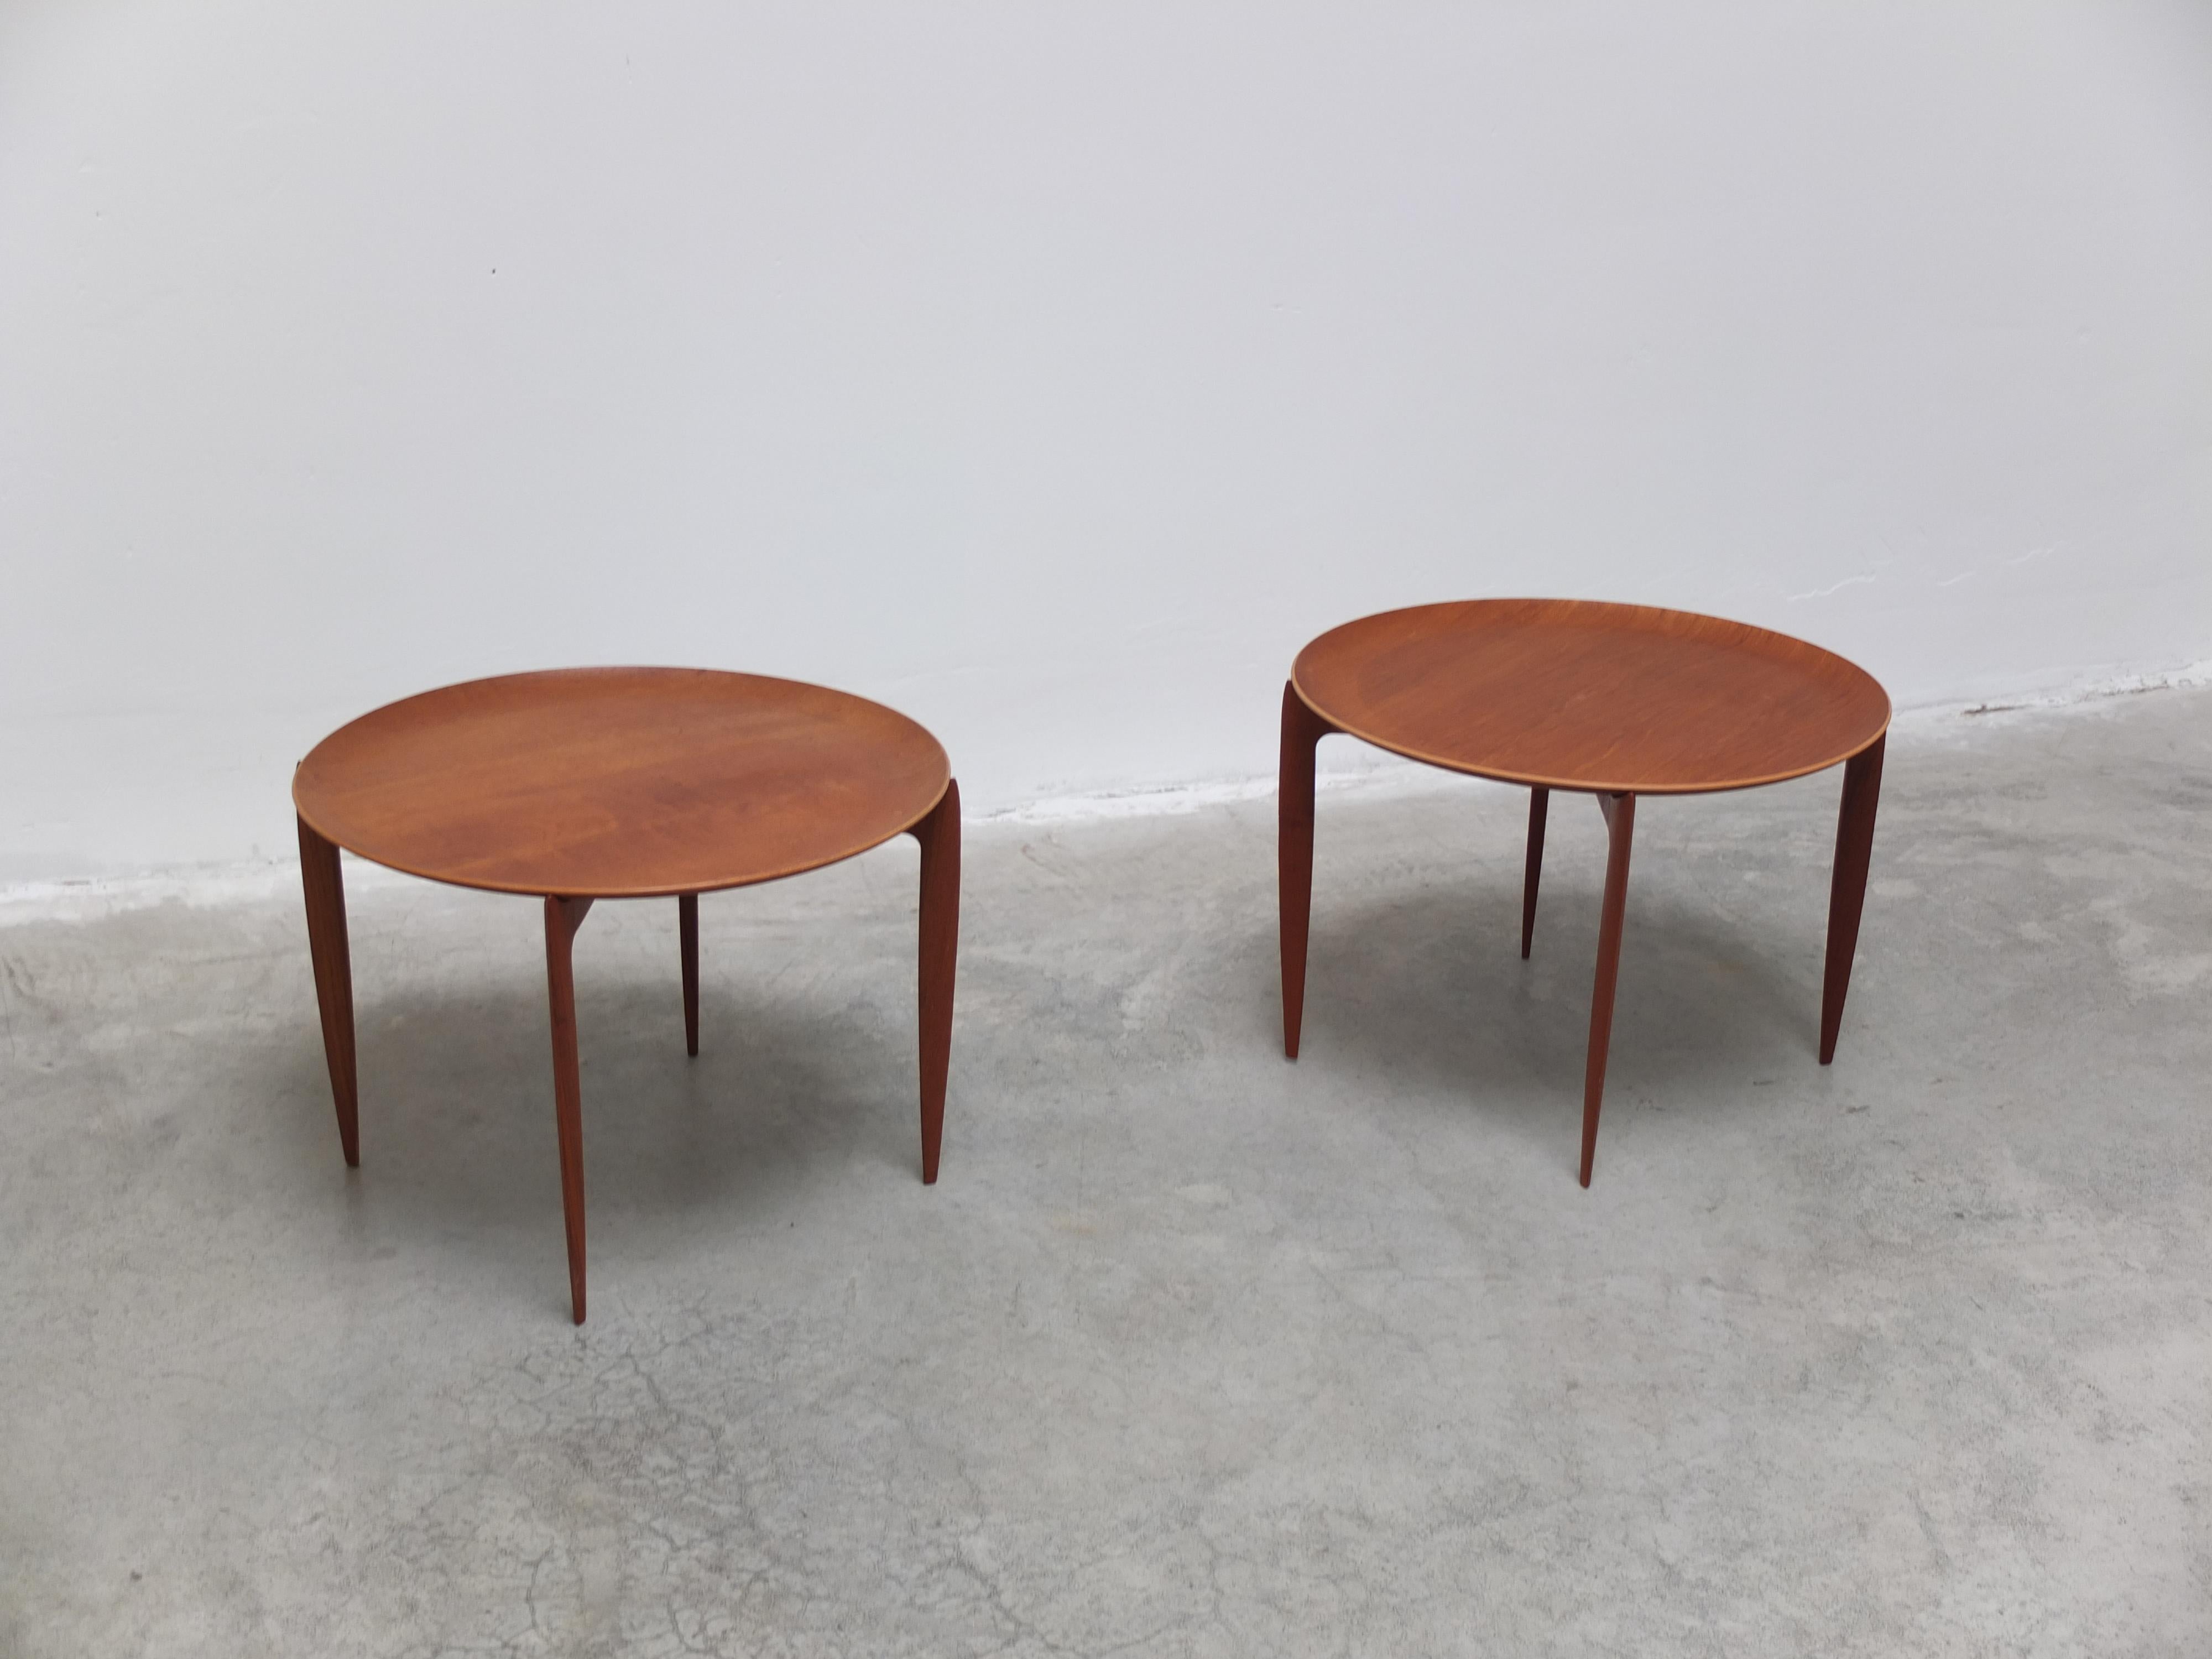 20th Century Early Pair of Tray Tables in Teak by Willumsen & Engholm for Fritz Hansen, 1958 For Sale